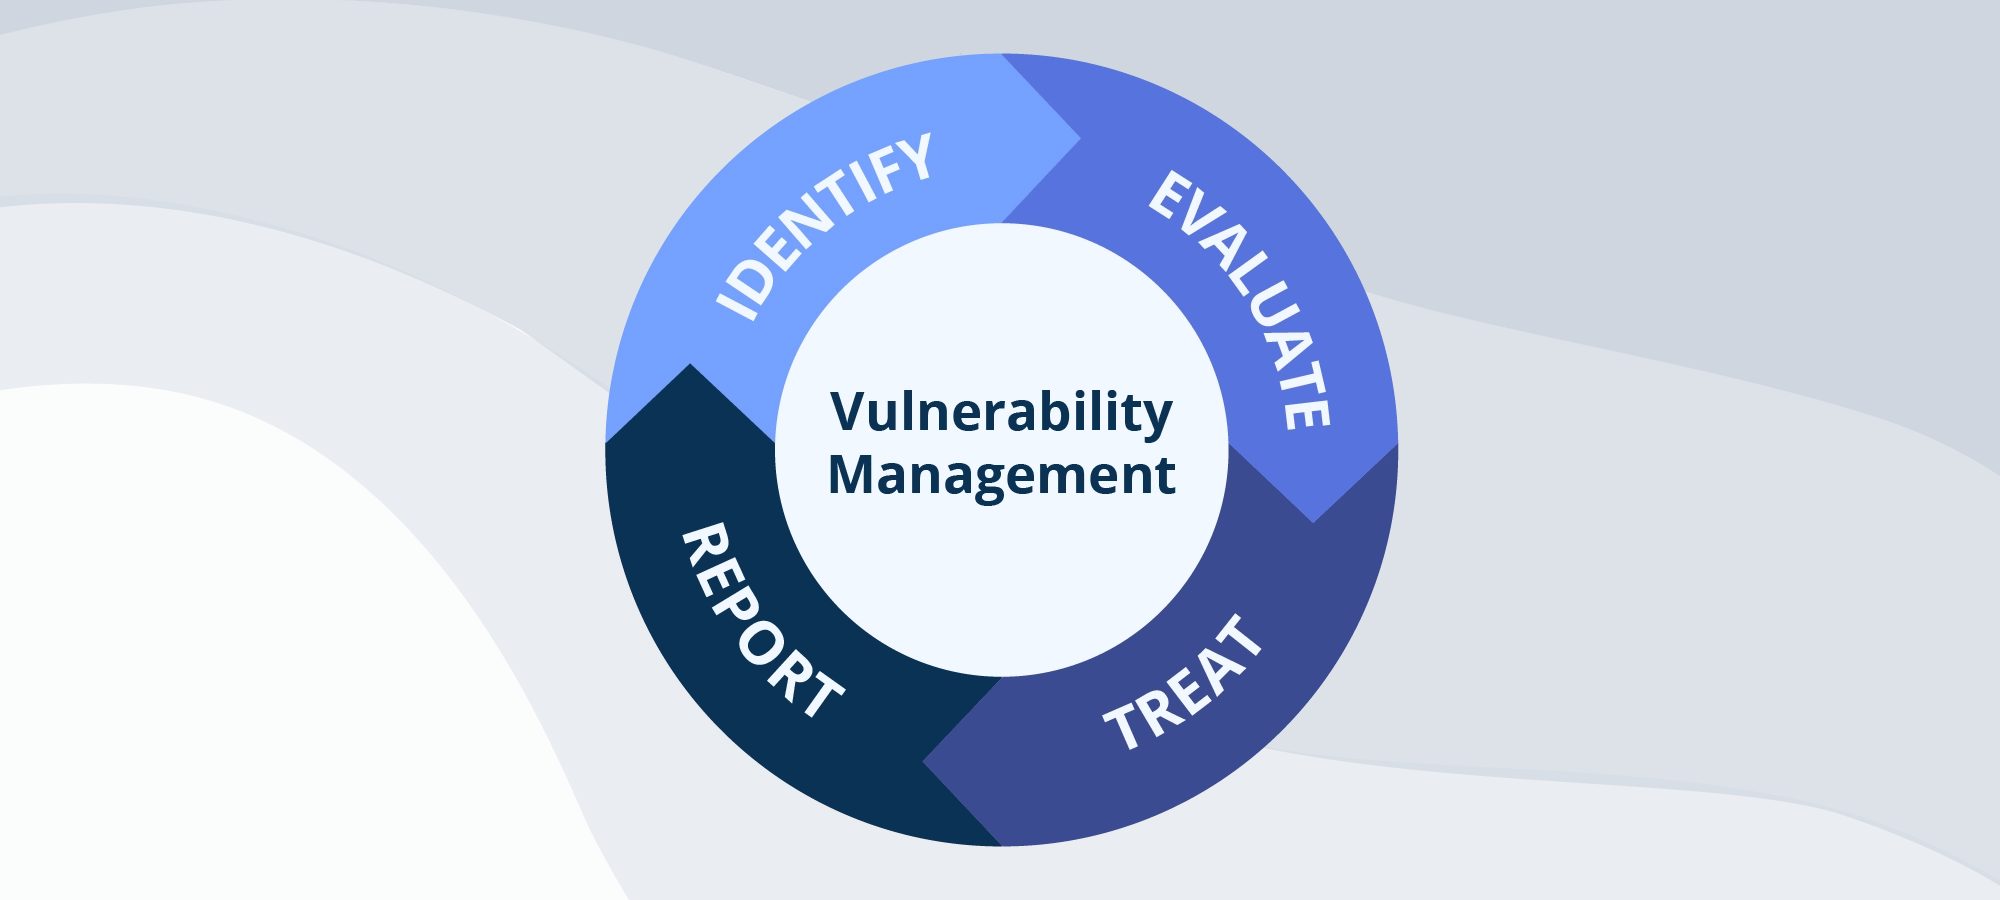 Identification, assessment, and mitigation of security vulnerabilities in systems